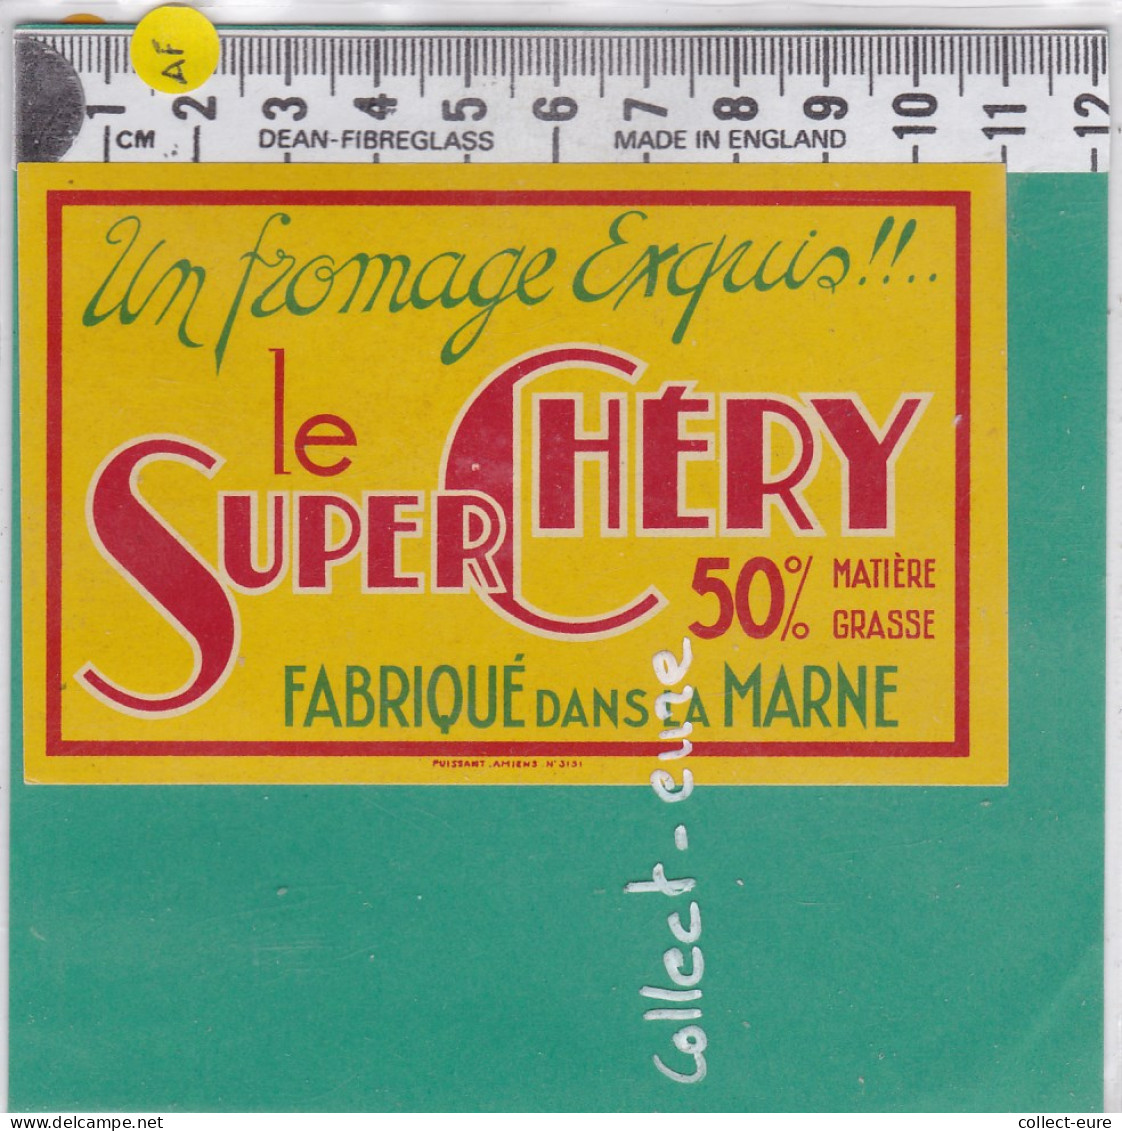 C1224 FROMAGE EXQUIS LE SUPER CHERY MARNE 50 % - Fromage